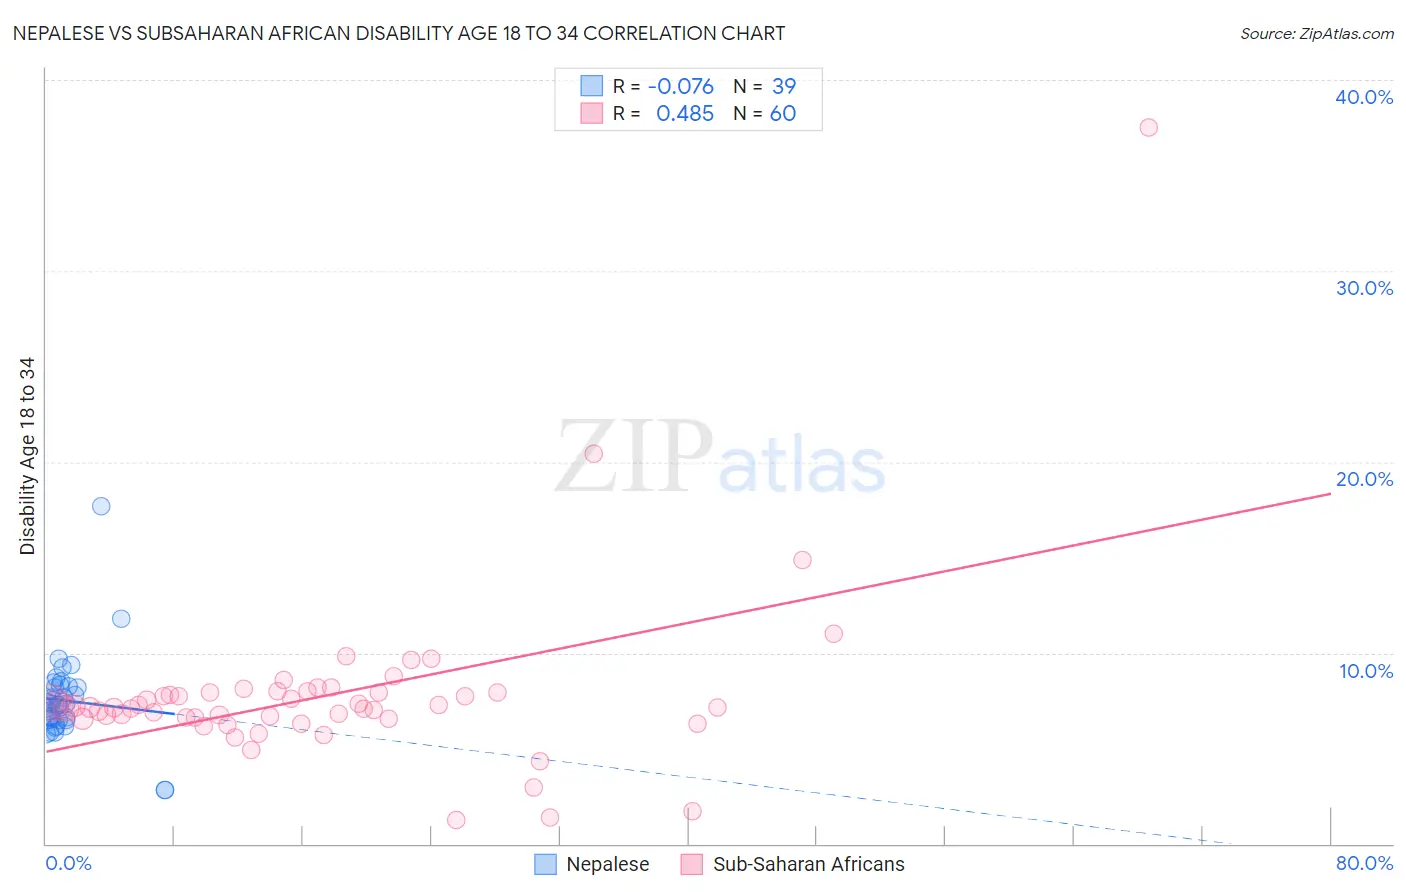 Nepalese vs Subsaharan African Disability Age 18 to 34